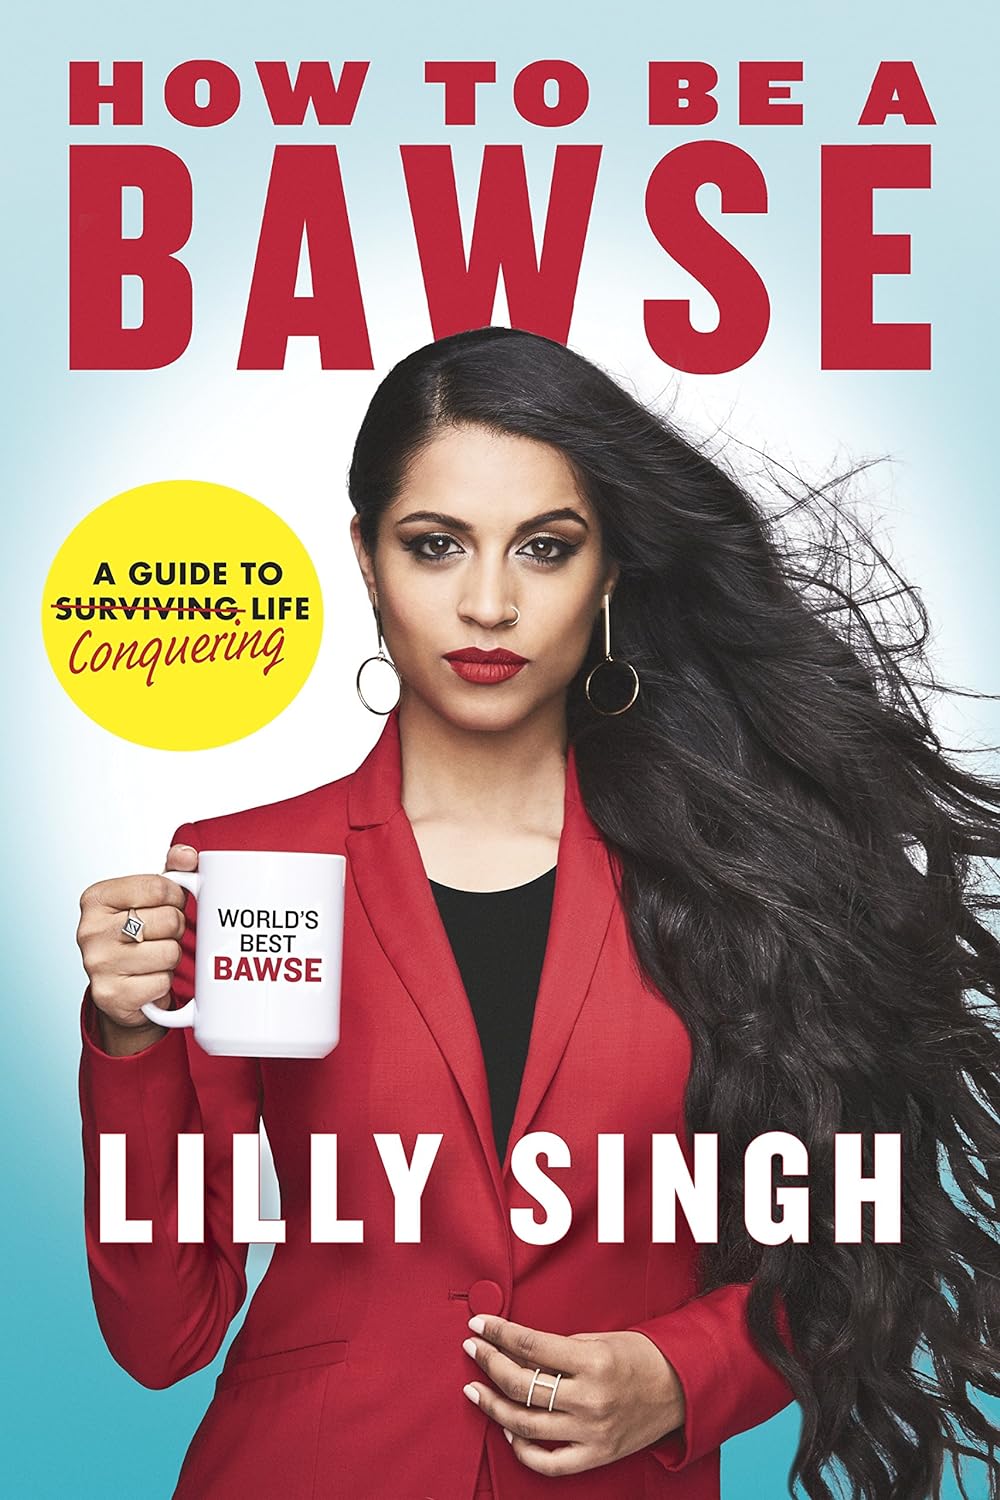 'How to Be a Bawse' by Lilly Singh